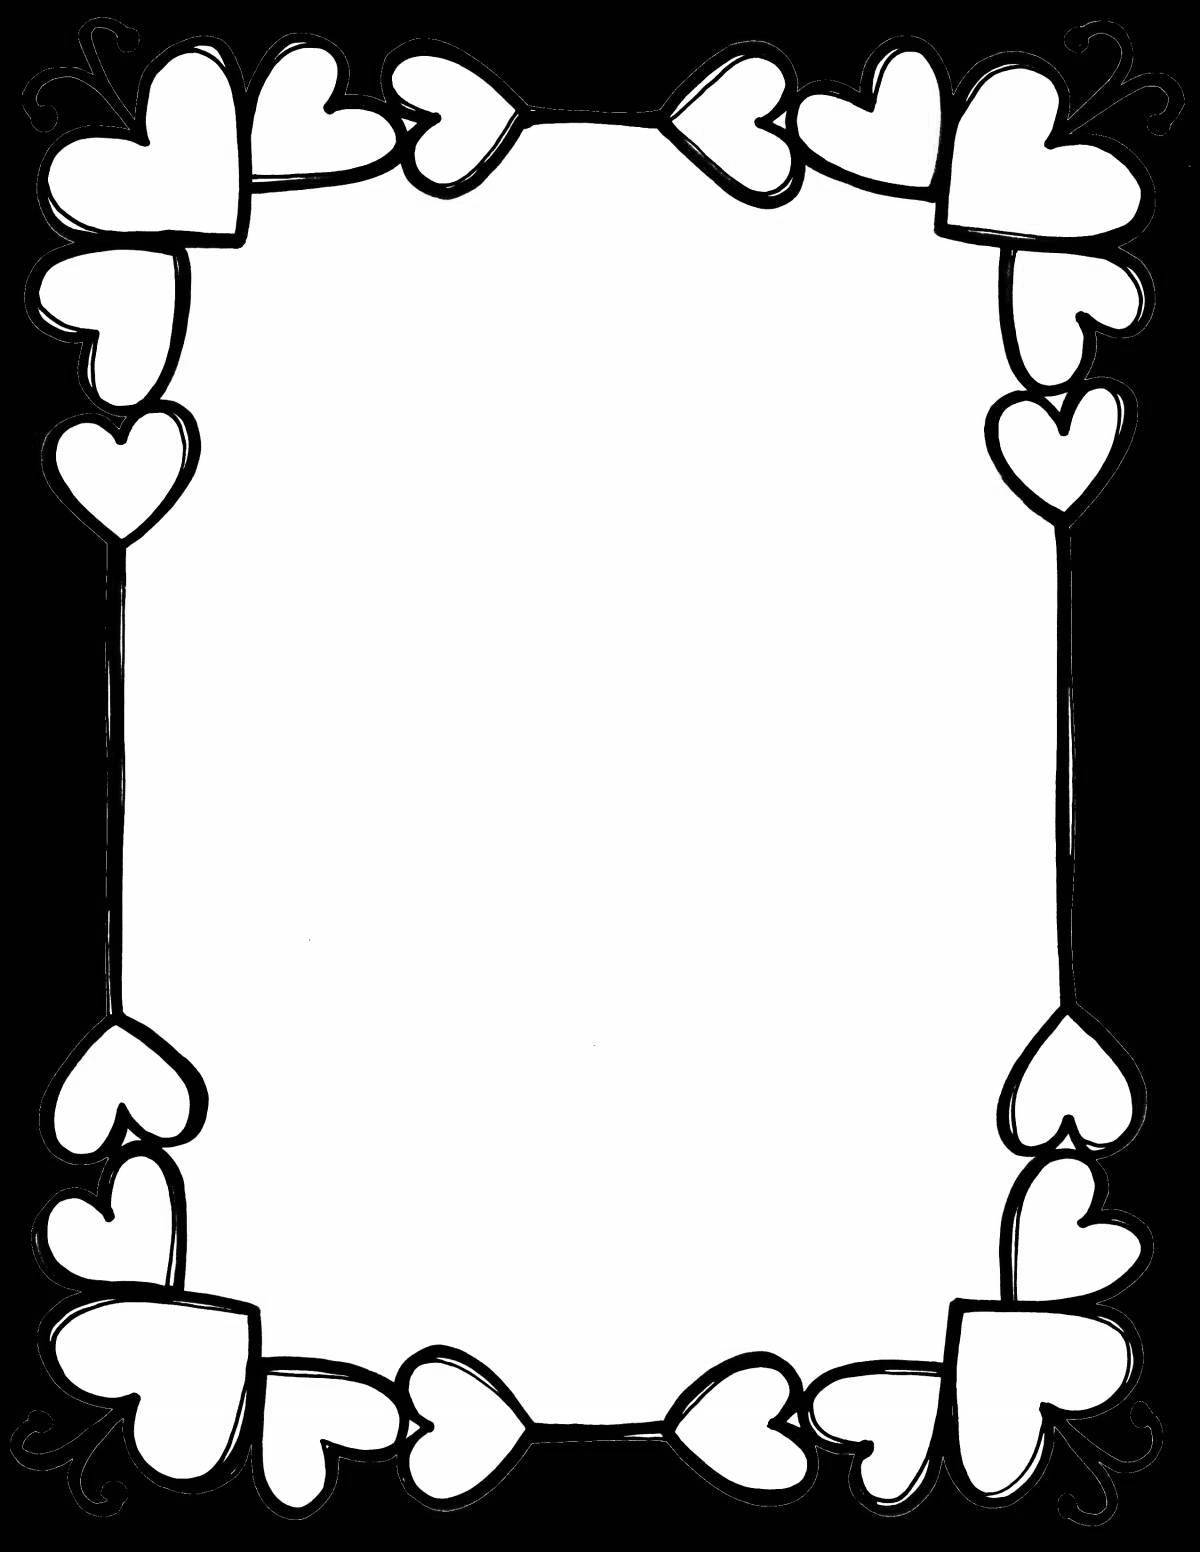 Coloring page of complex portrait frame